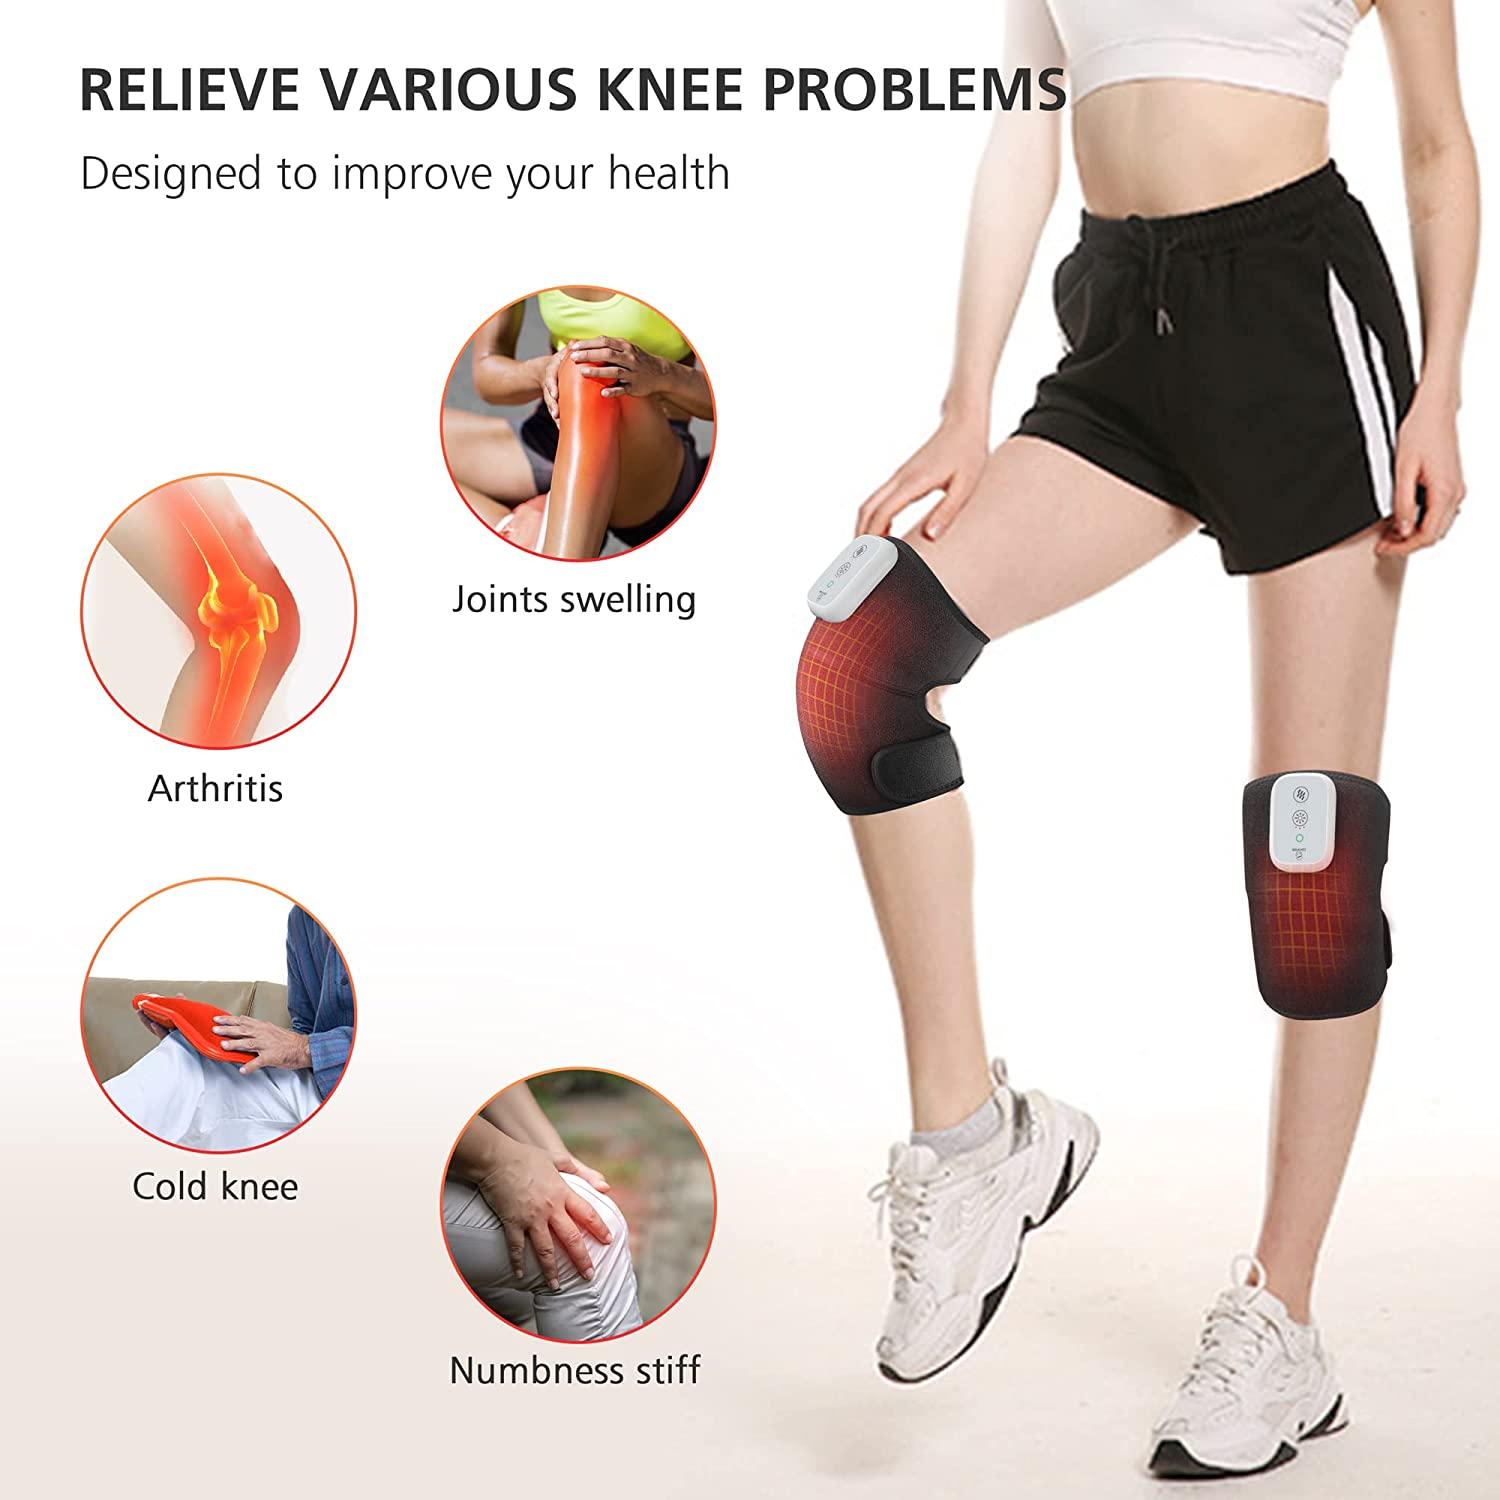 COMFIER Cordless Knee Massager with Heat, Vibration Knee Brace Wrap for  Arthritis Pain Relief, 3-in-1 Heating Pad for Knee Shoulder Elbow, Knee